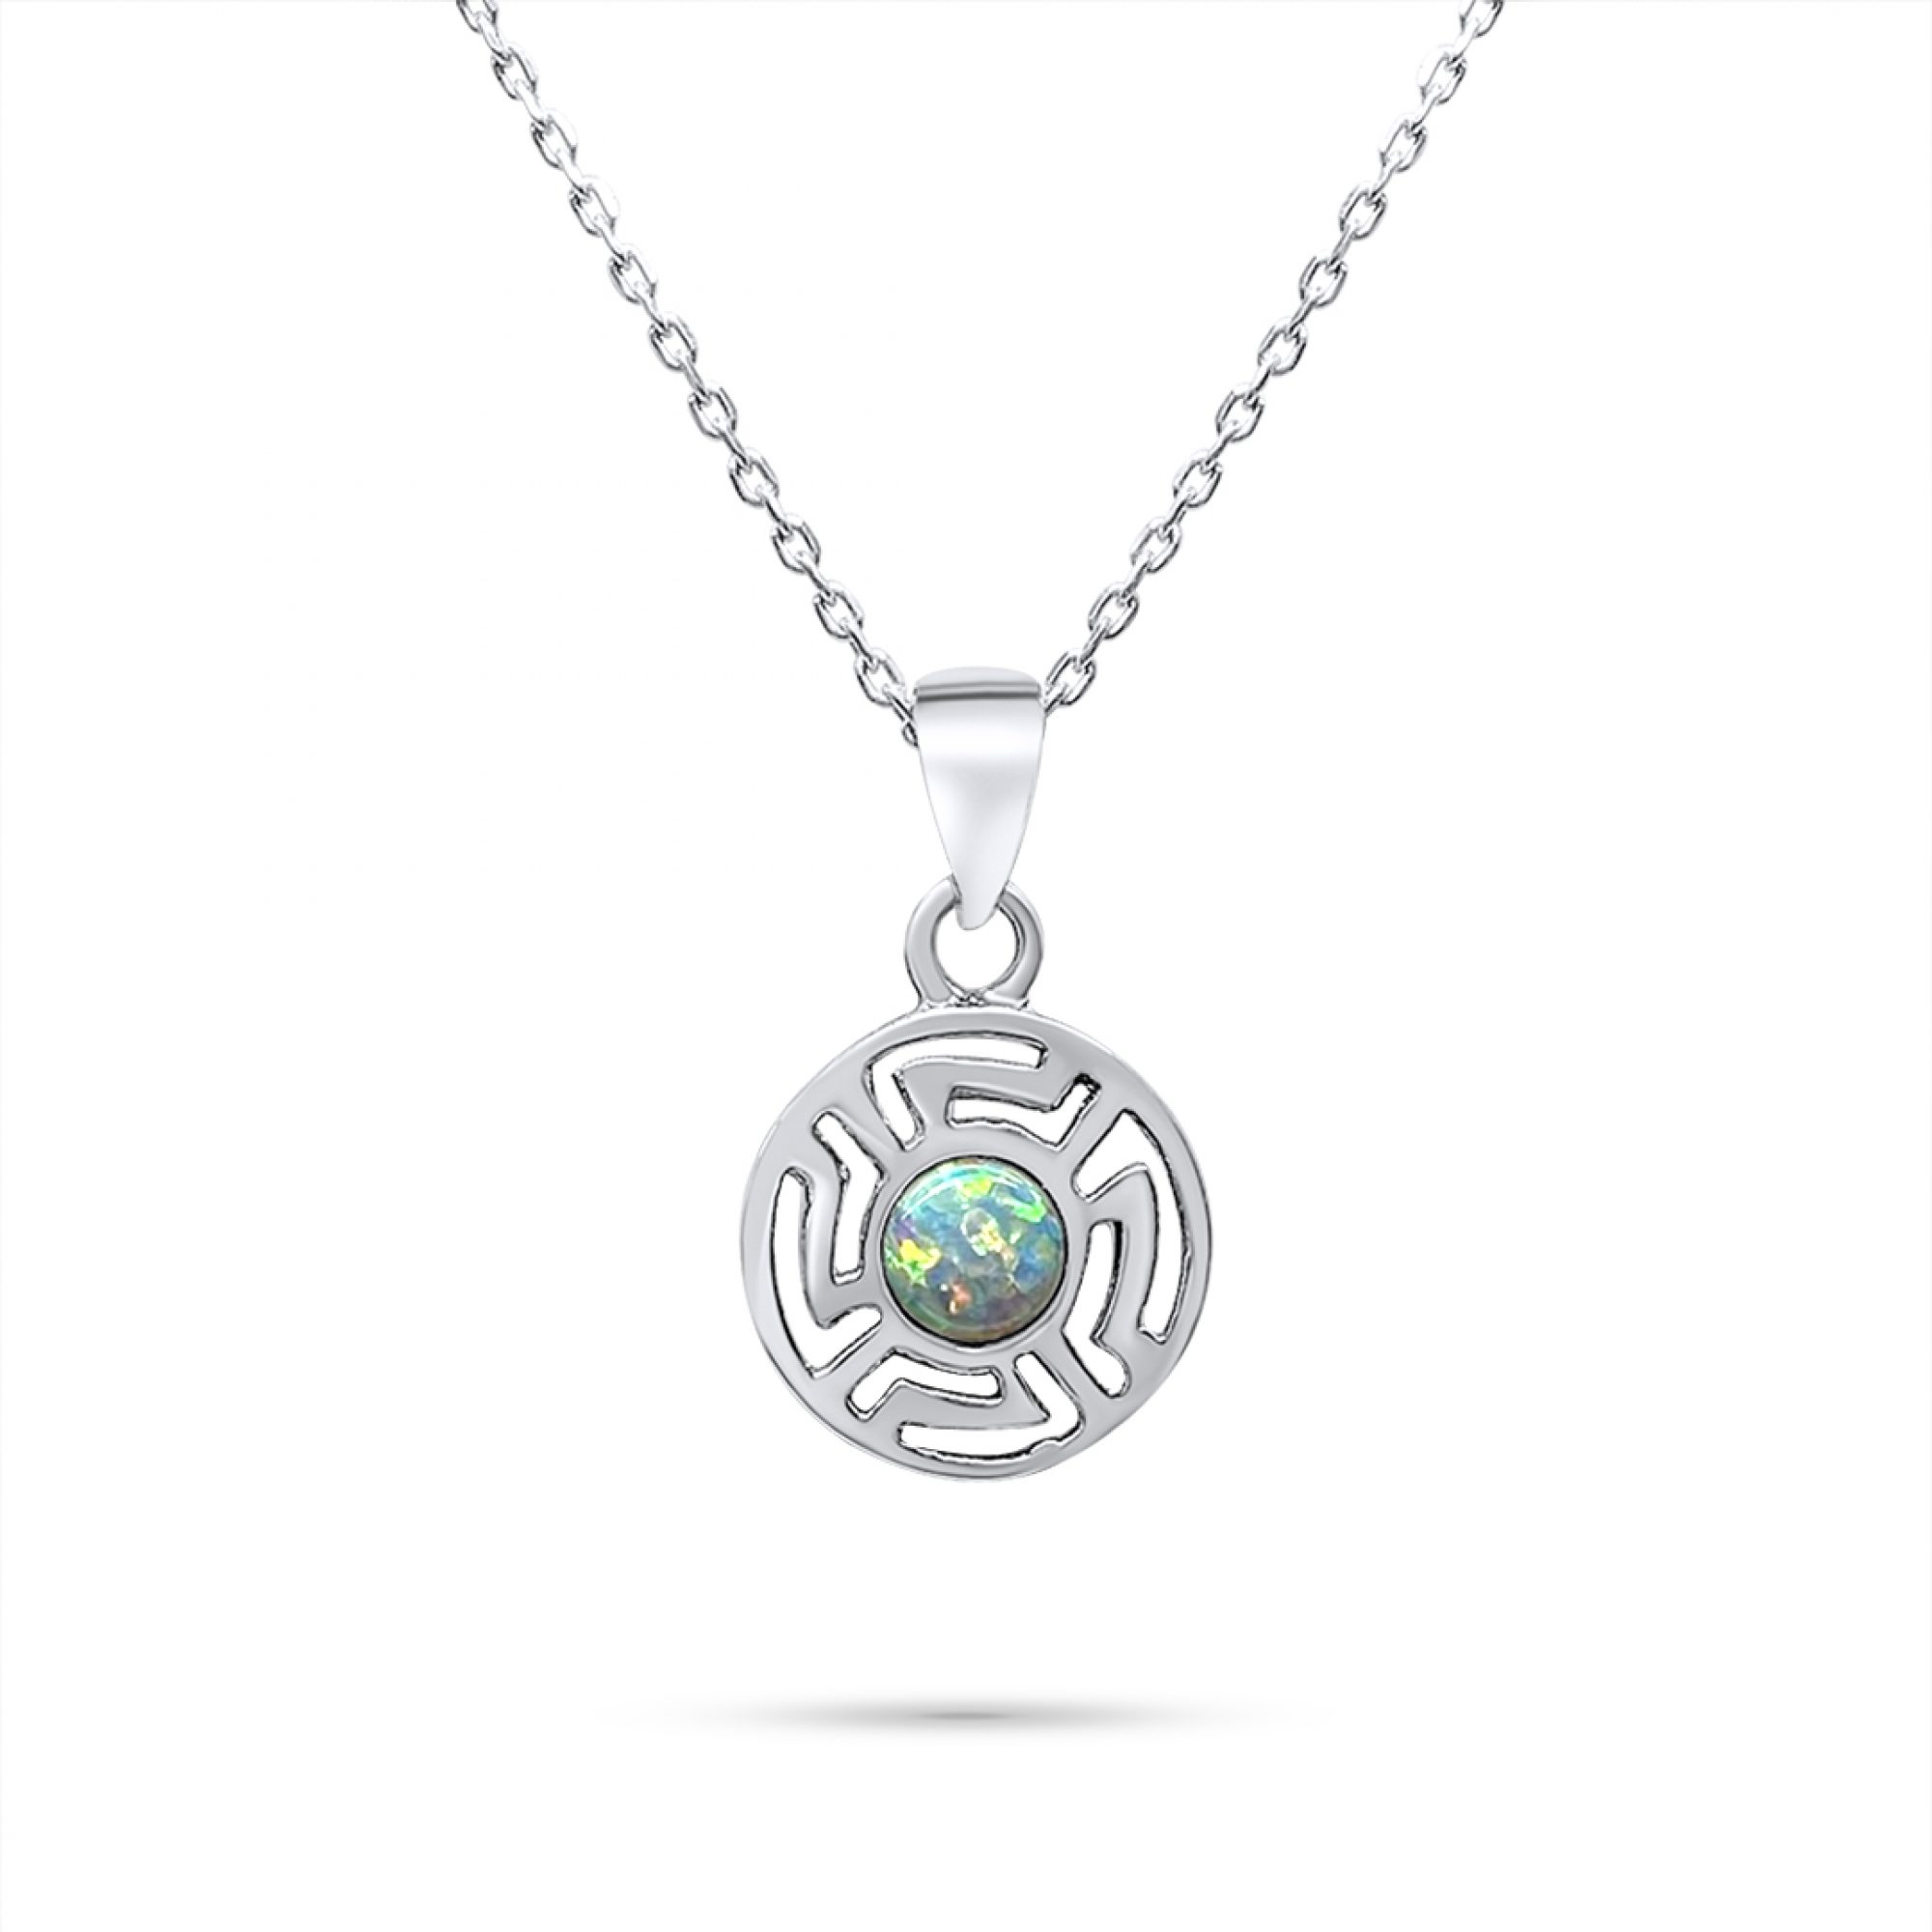 White opal pendant with meander